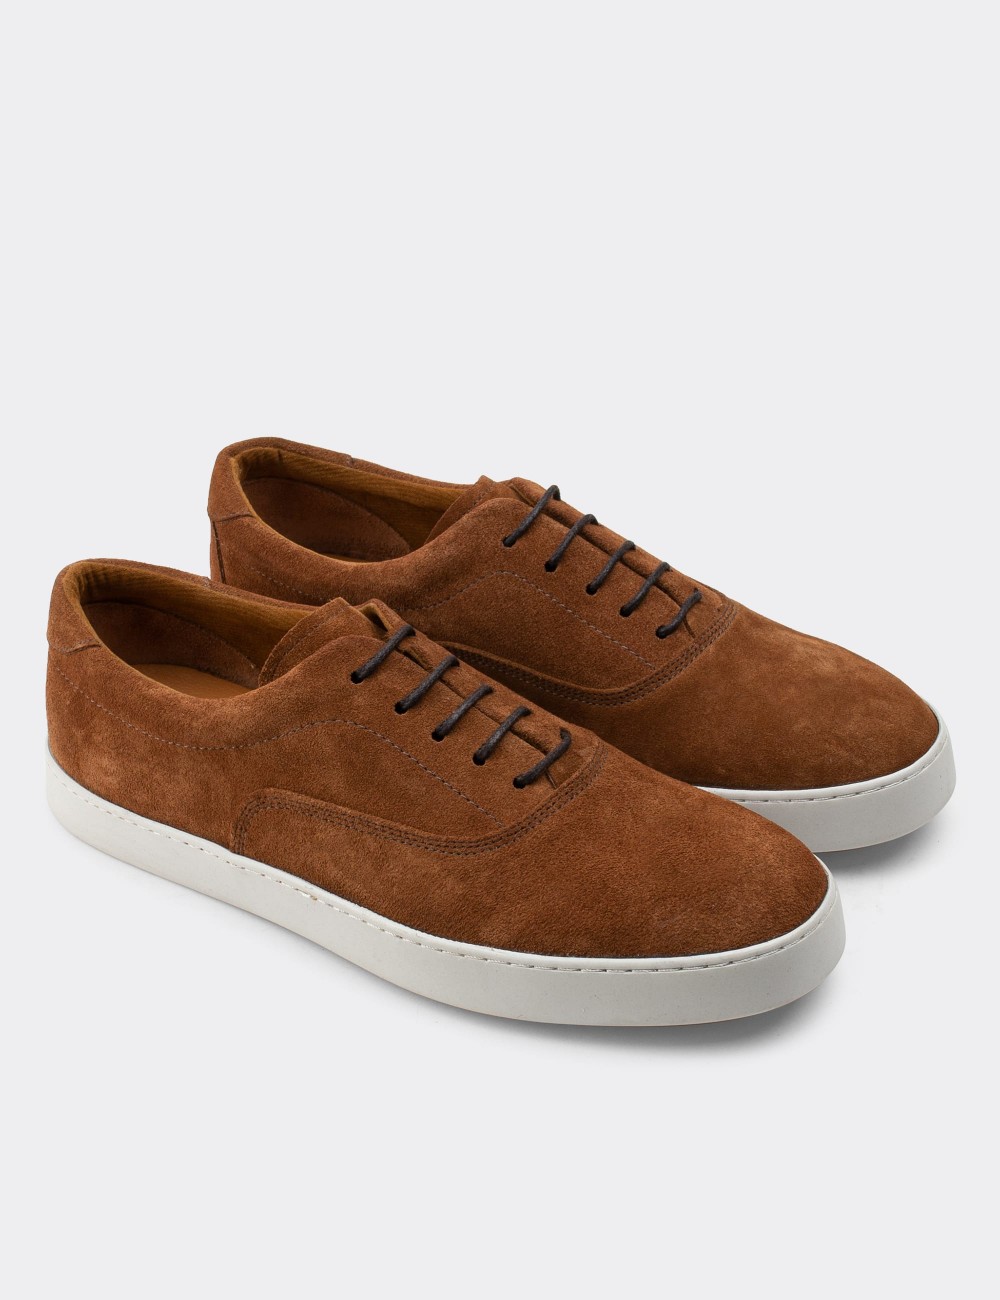 Tan Suede Leather Sneakers - 01867MTBAC01